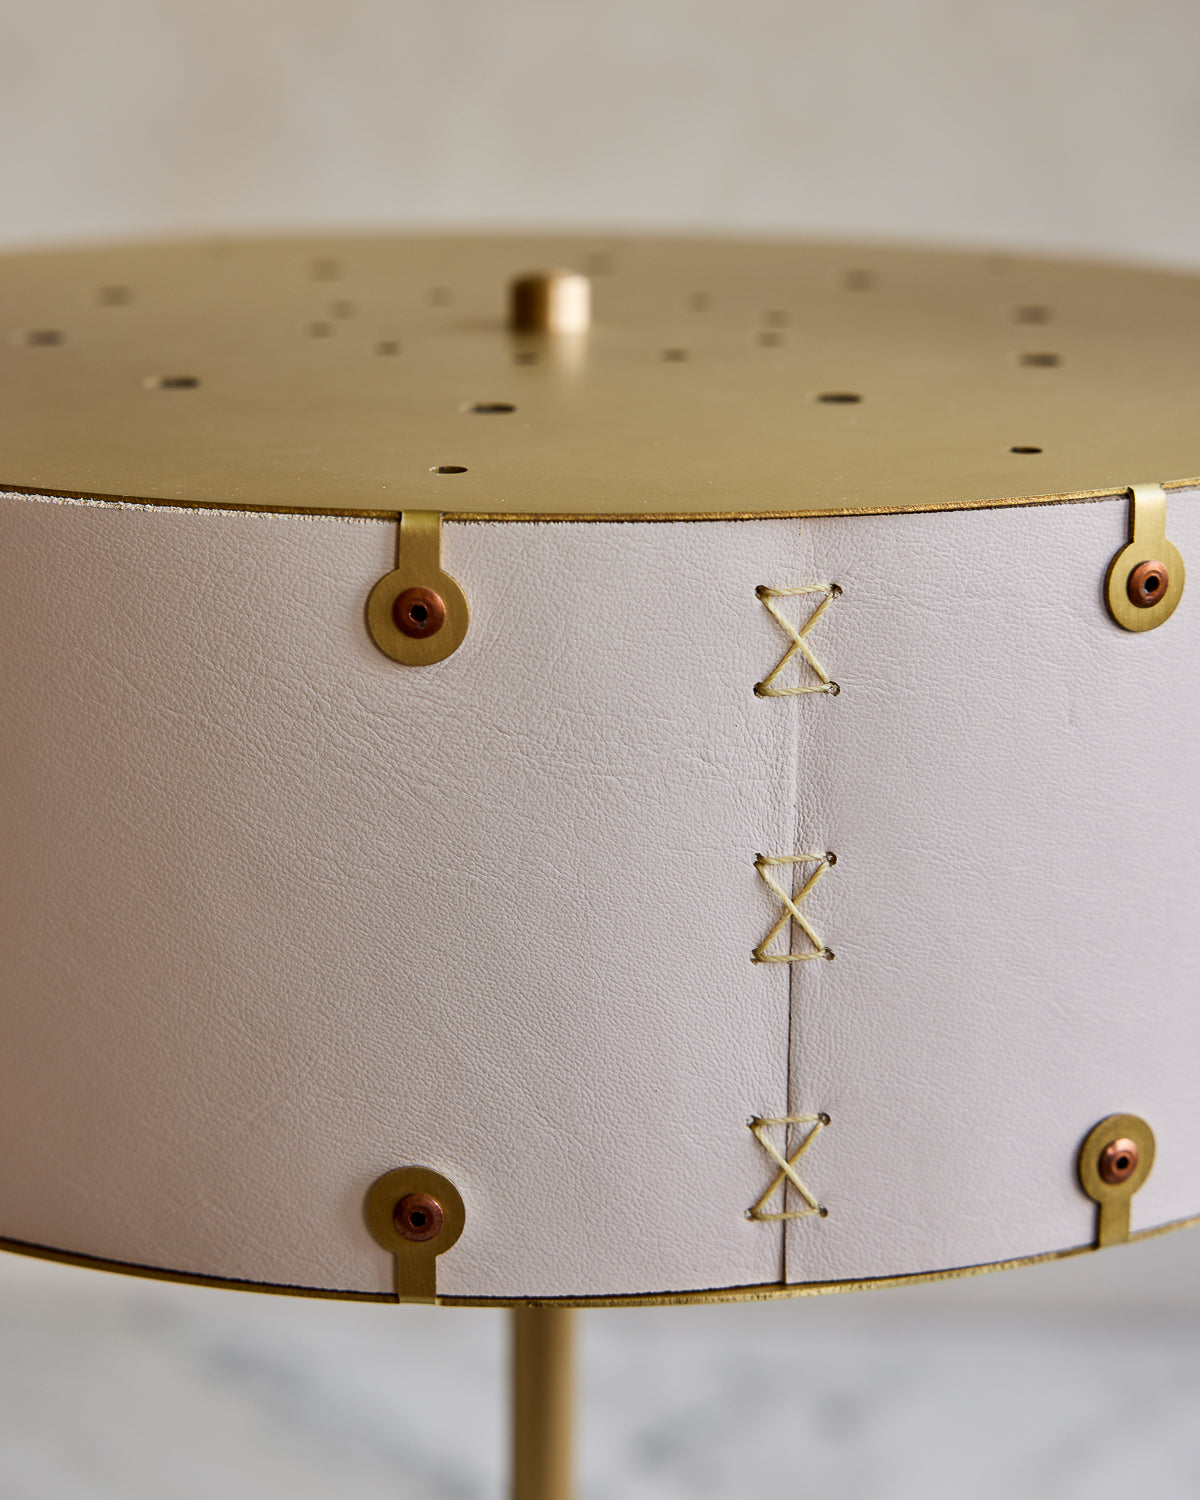 Brass table lamp with walnut base and white leather shade